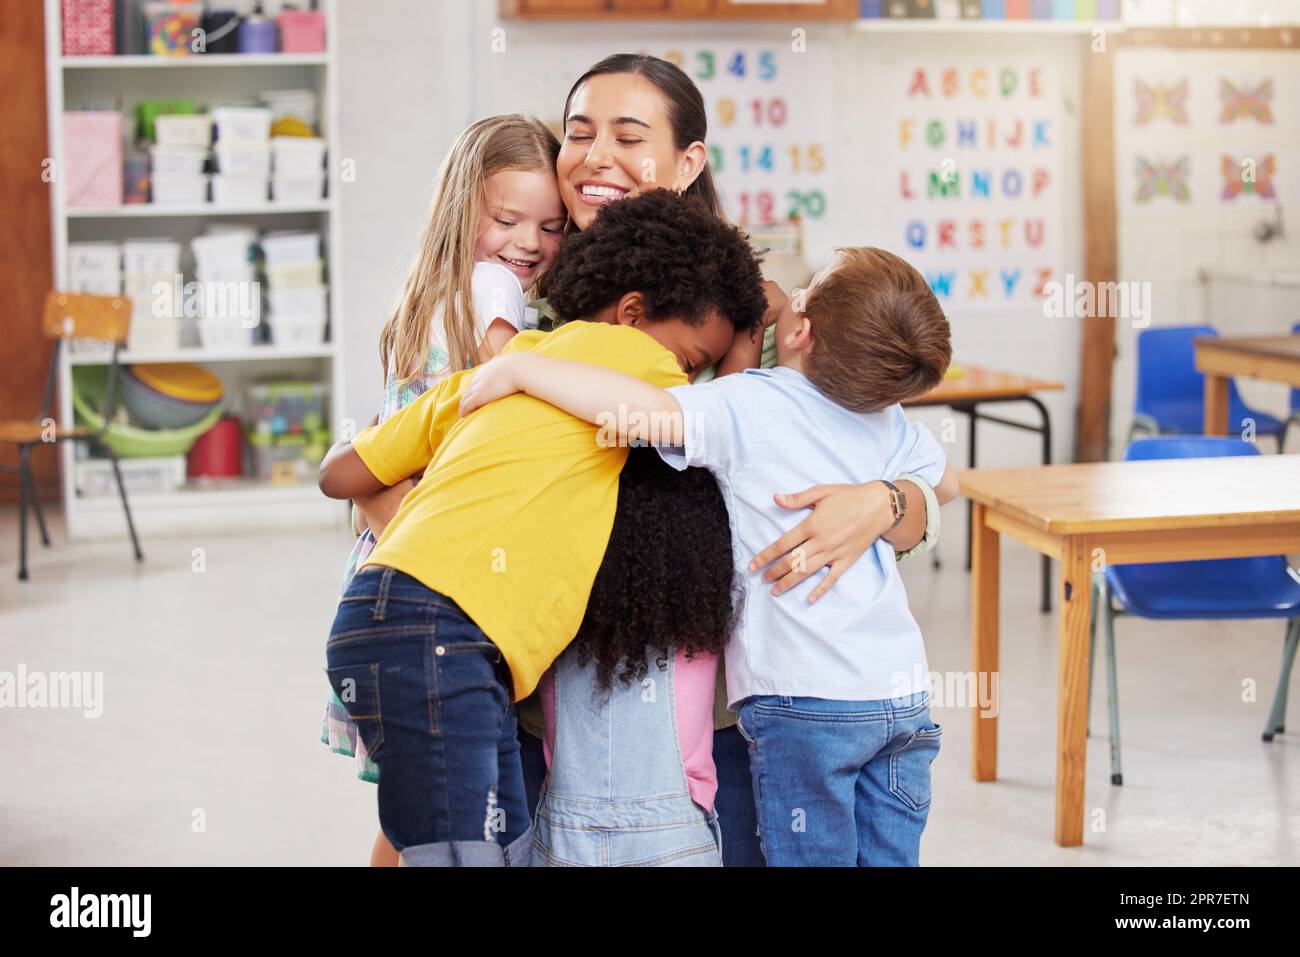 We love our teacher. Shot of a woman hugging her learners. Stock Photo